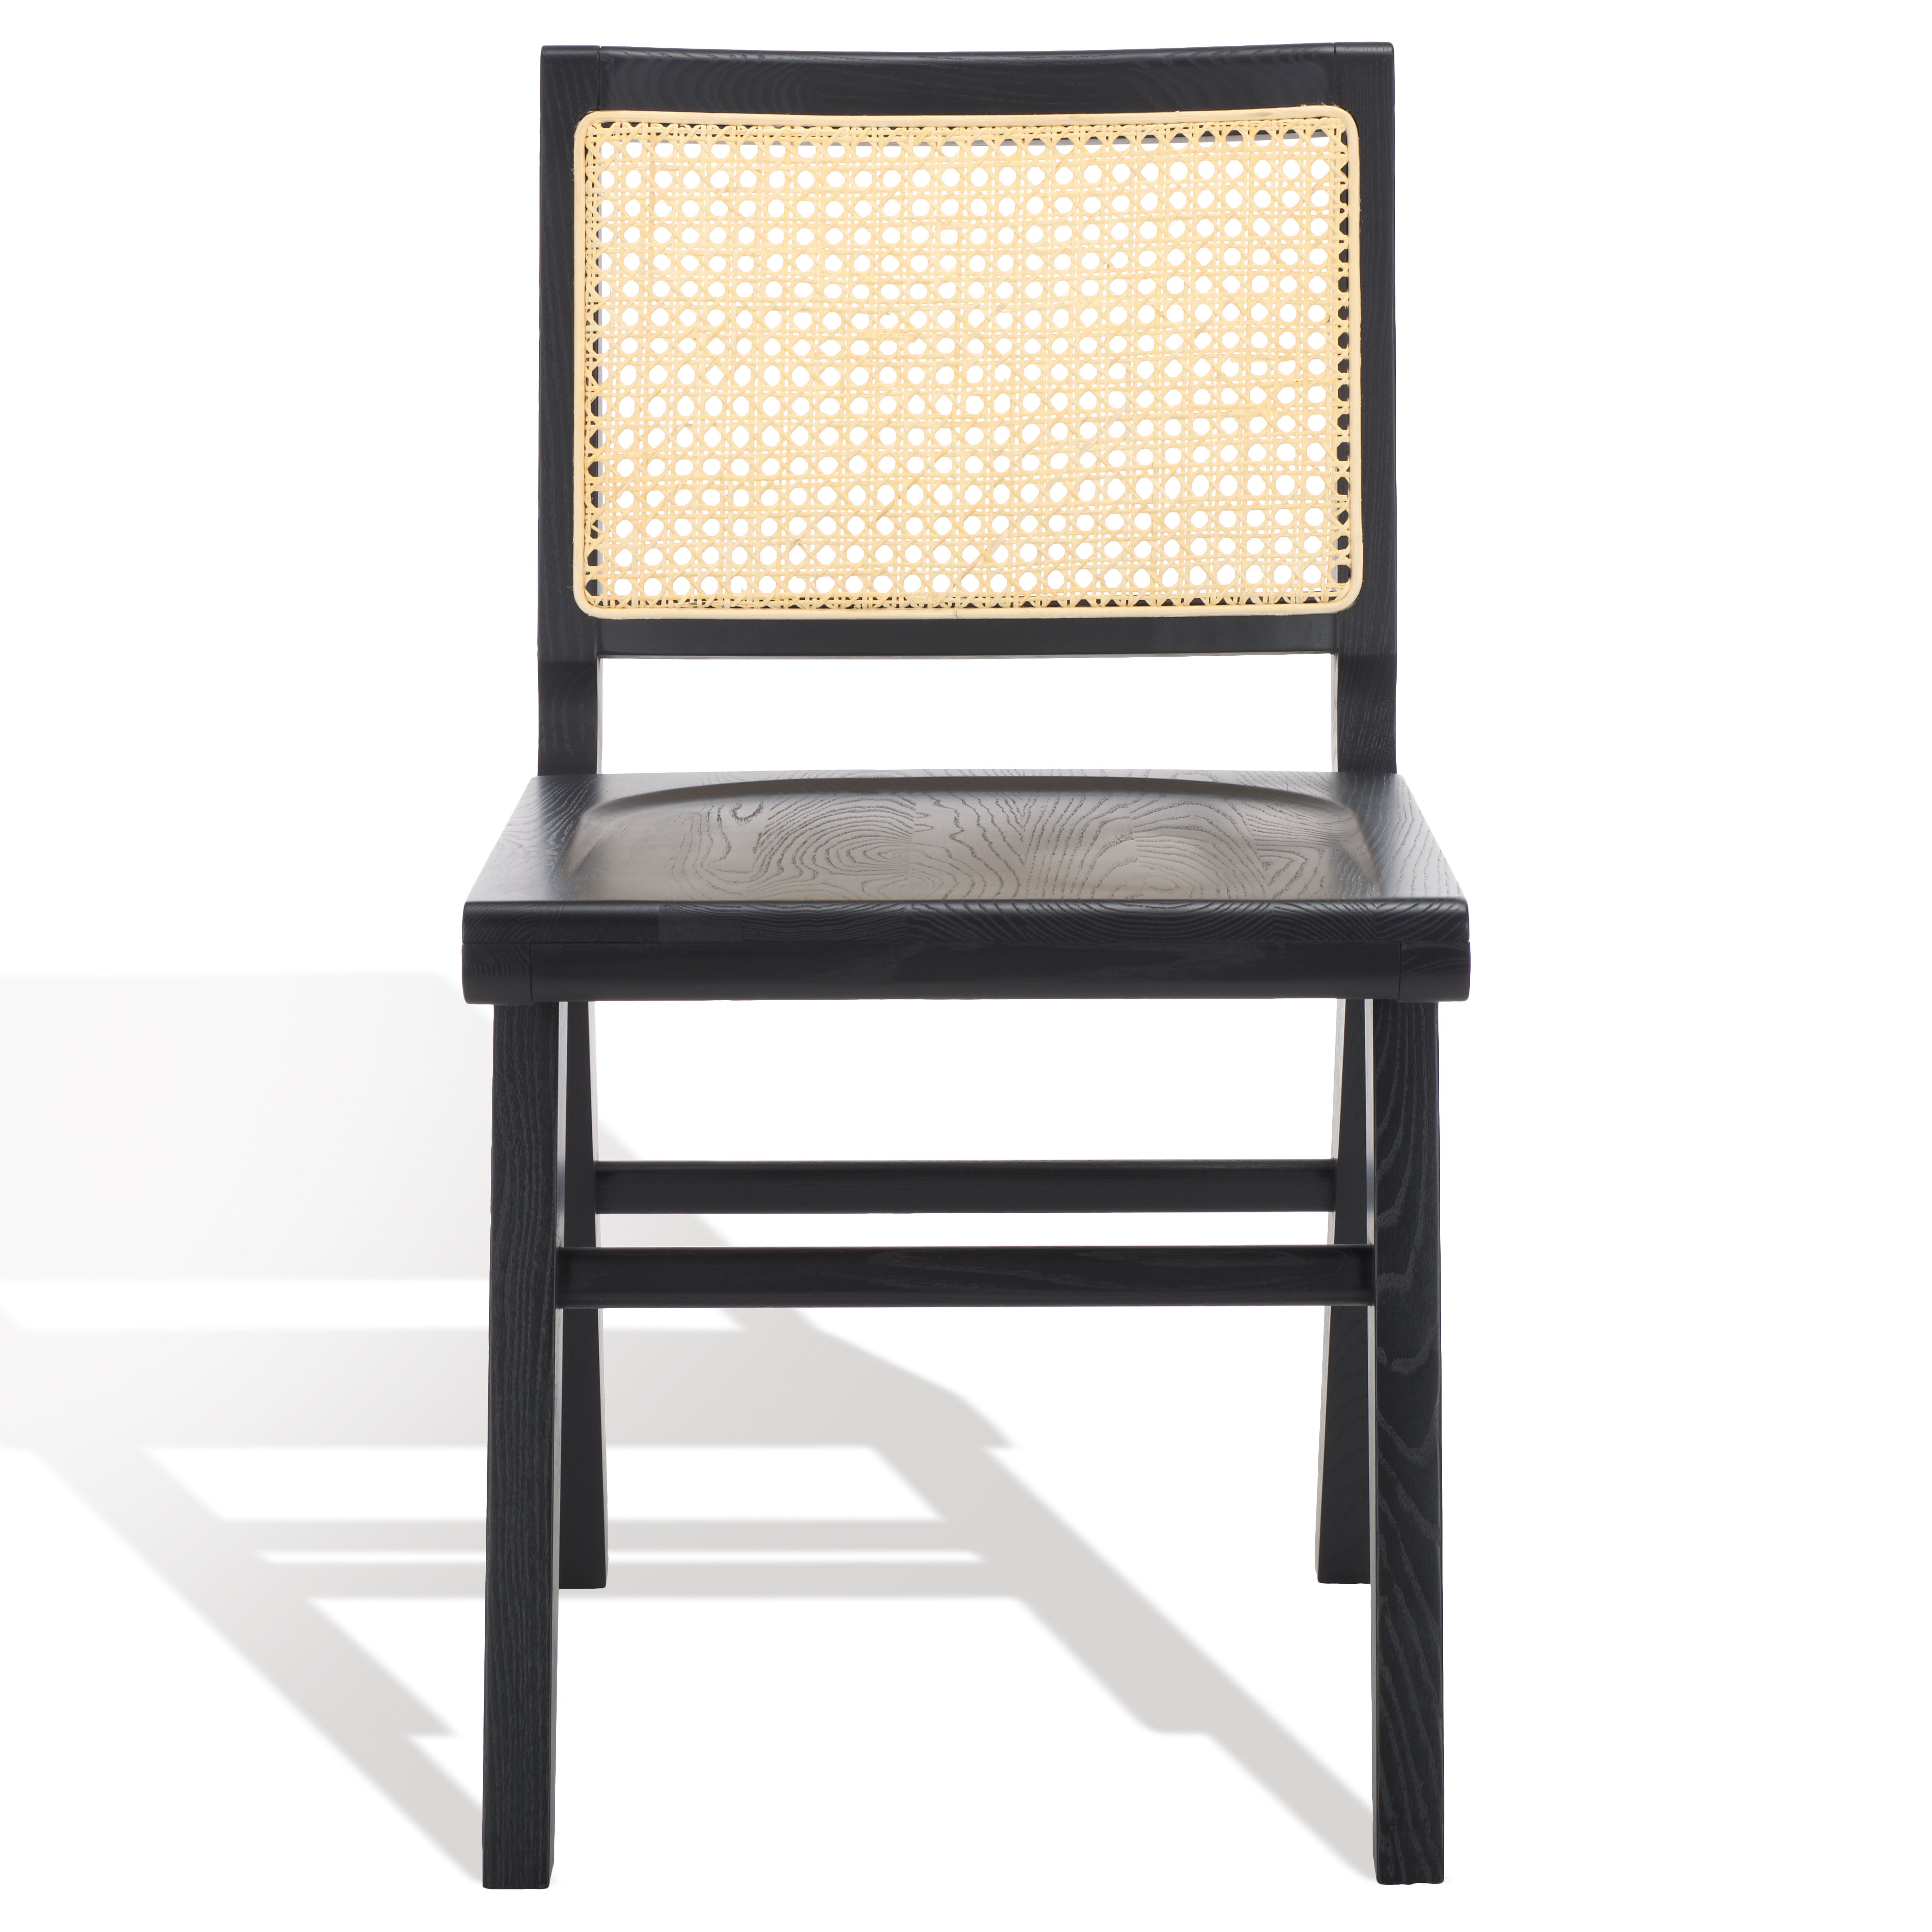 safavieh couture hattie french cane wood seat dining chair, sfv4153 - Black / Natural